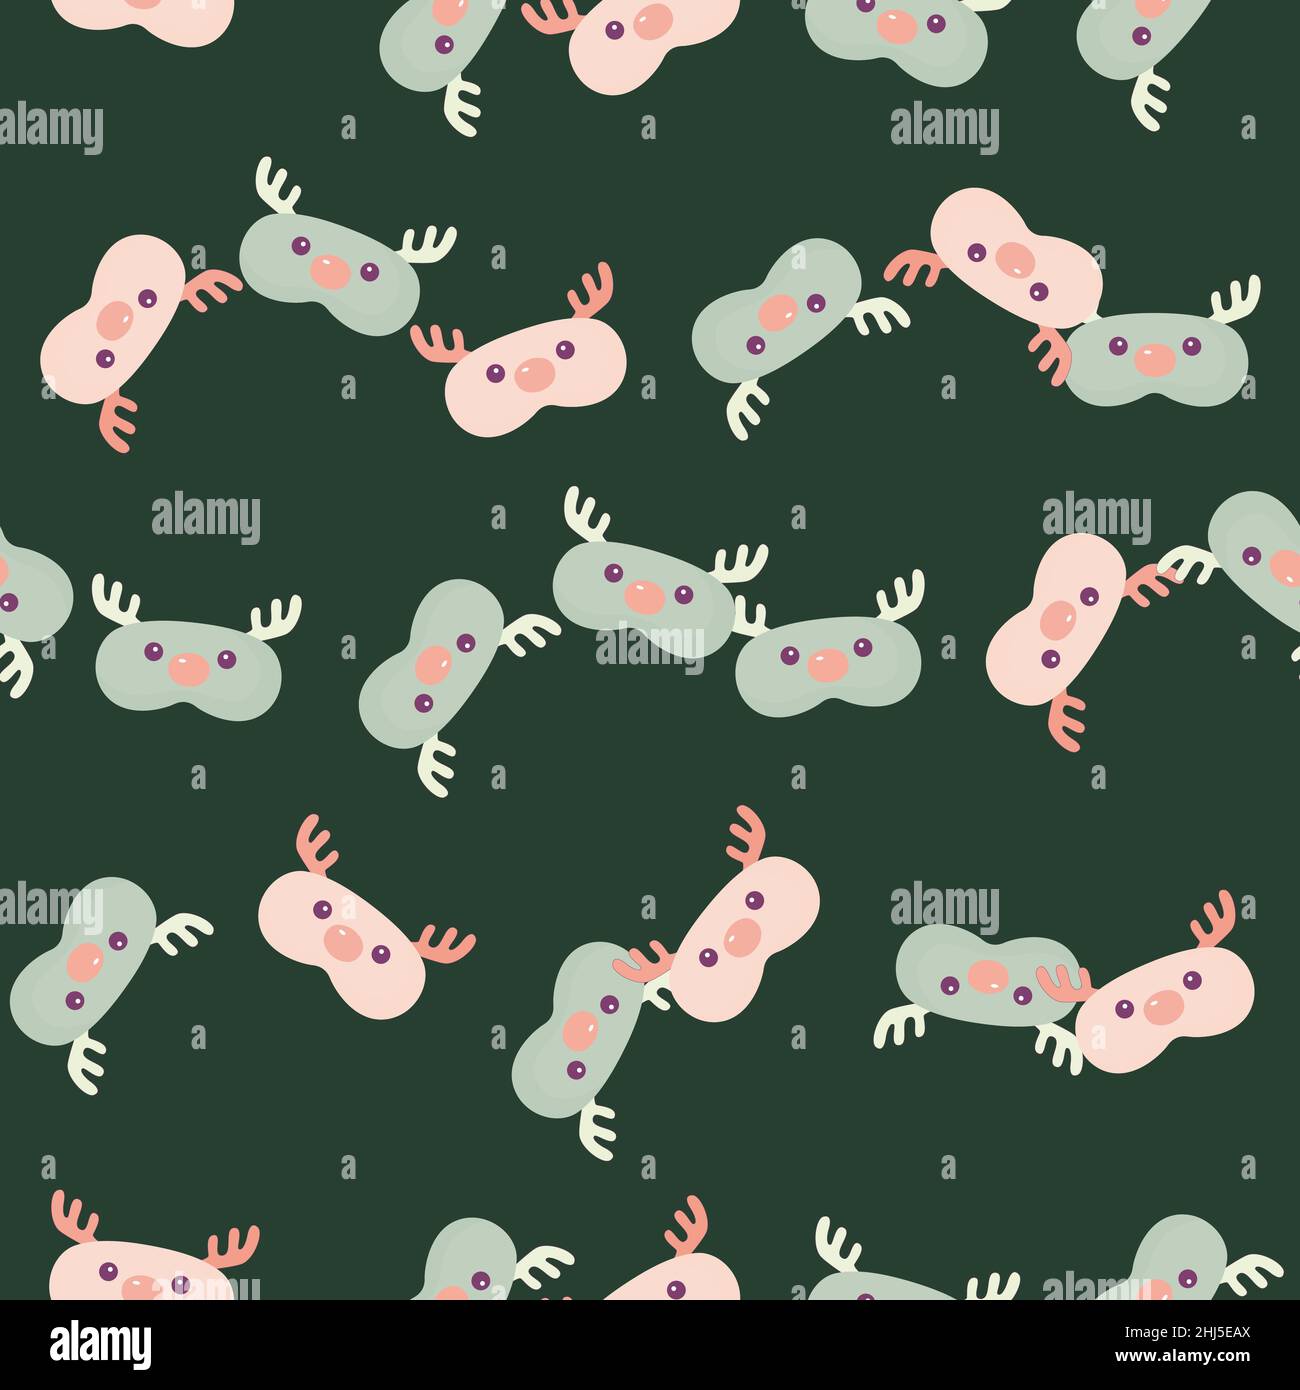 Head deer light green and pink chaotic seamless pattern on dark green background. Children graphic design element for different purposes. Flat vector Stock Vector